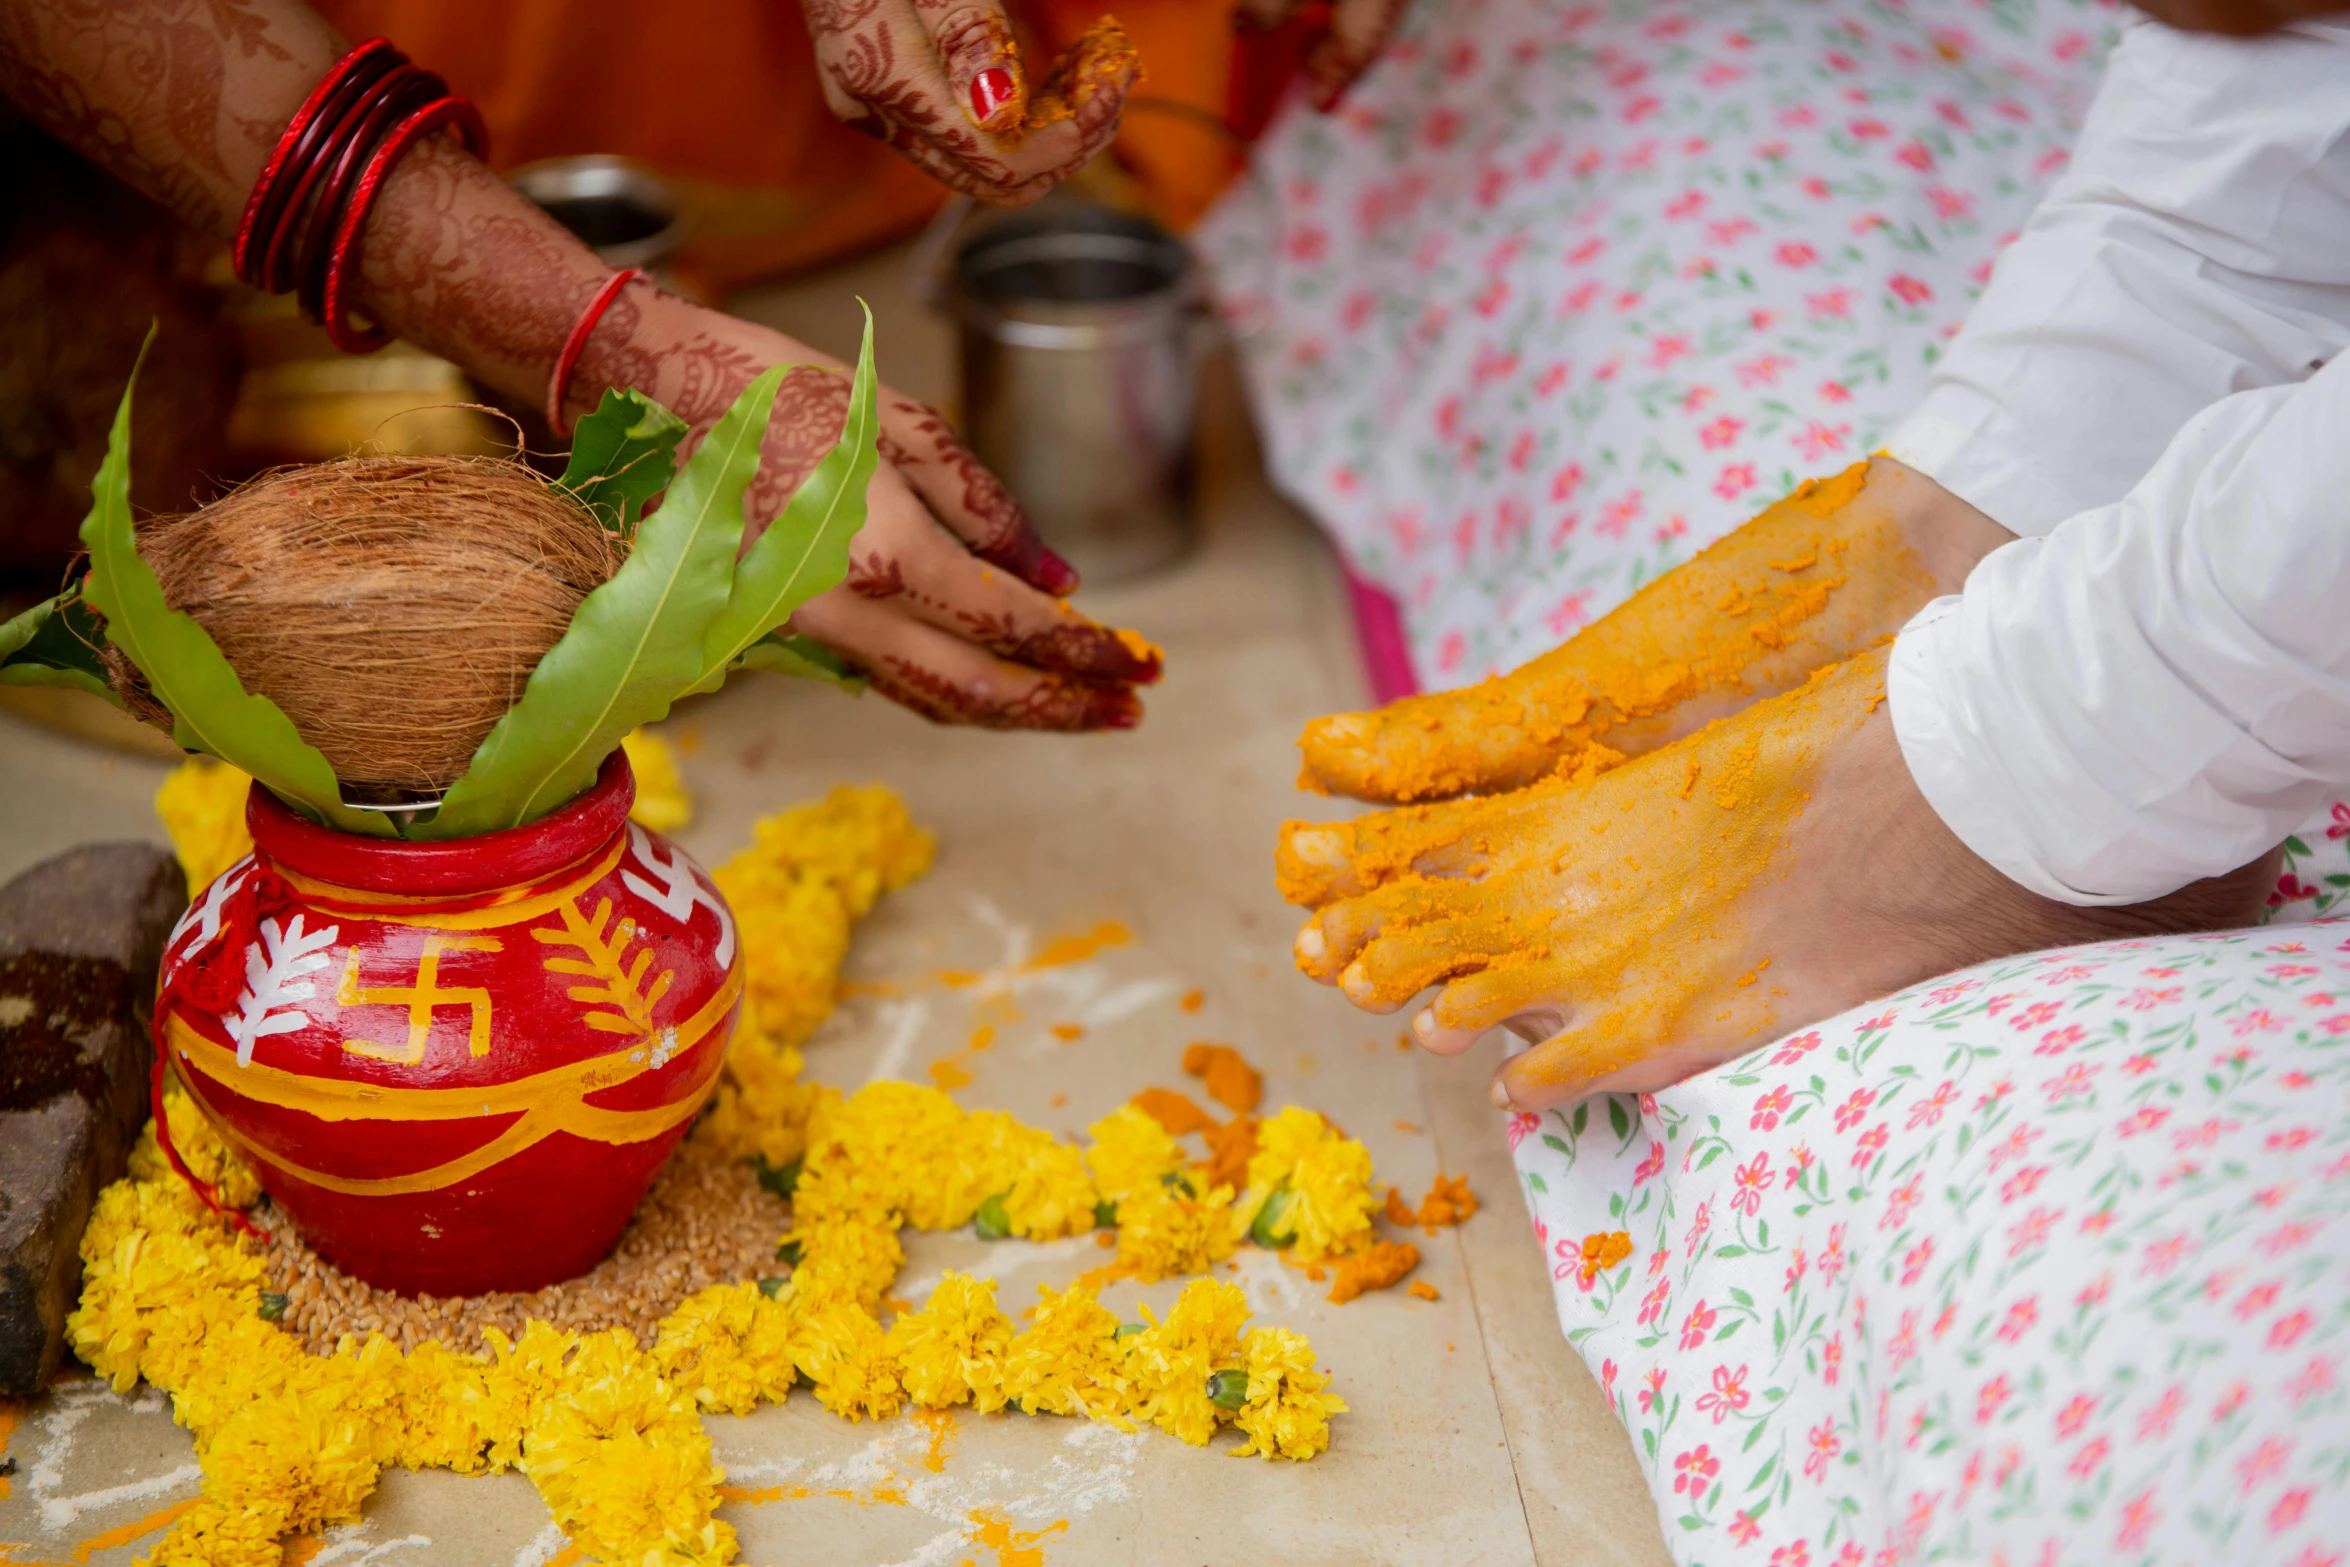 a person is giving yellow powder to someone's hand